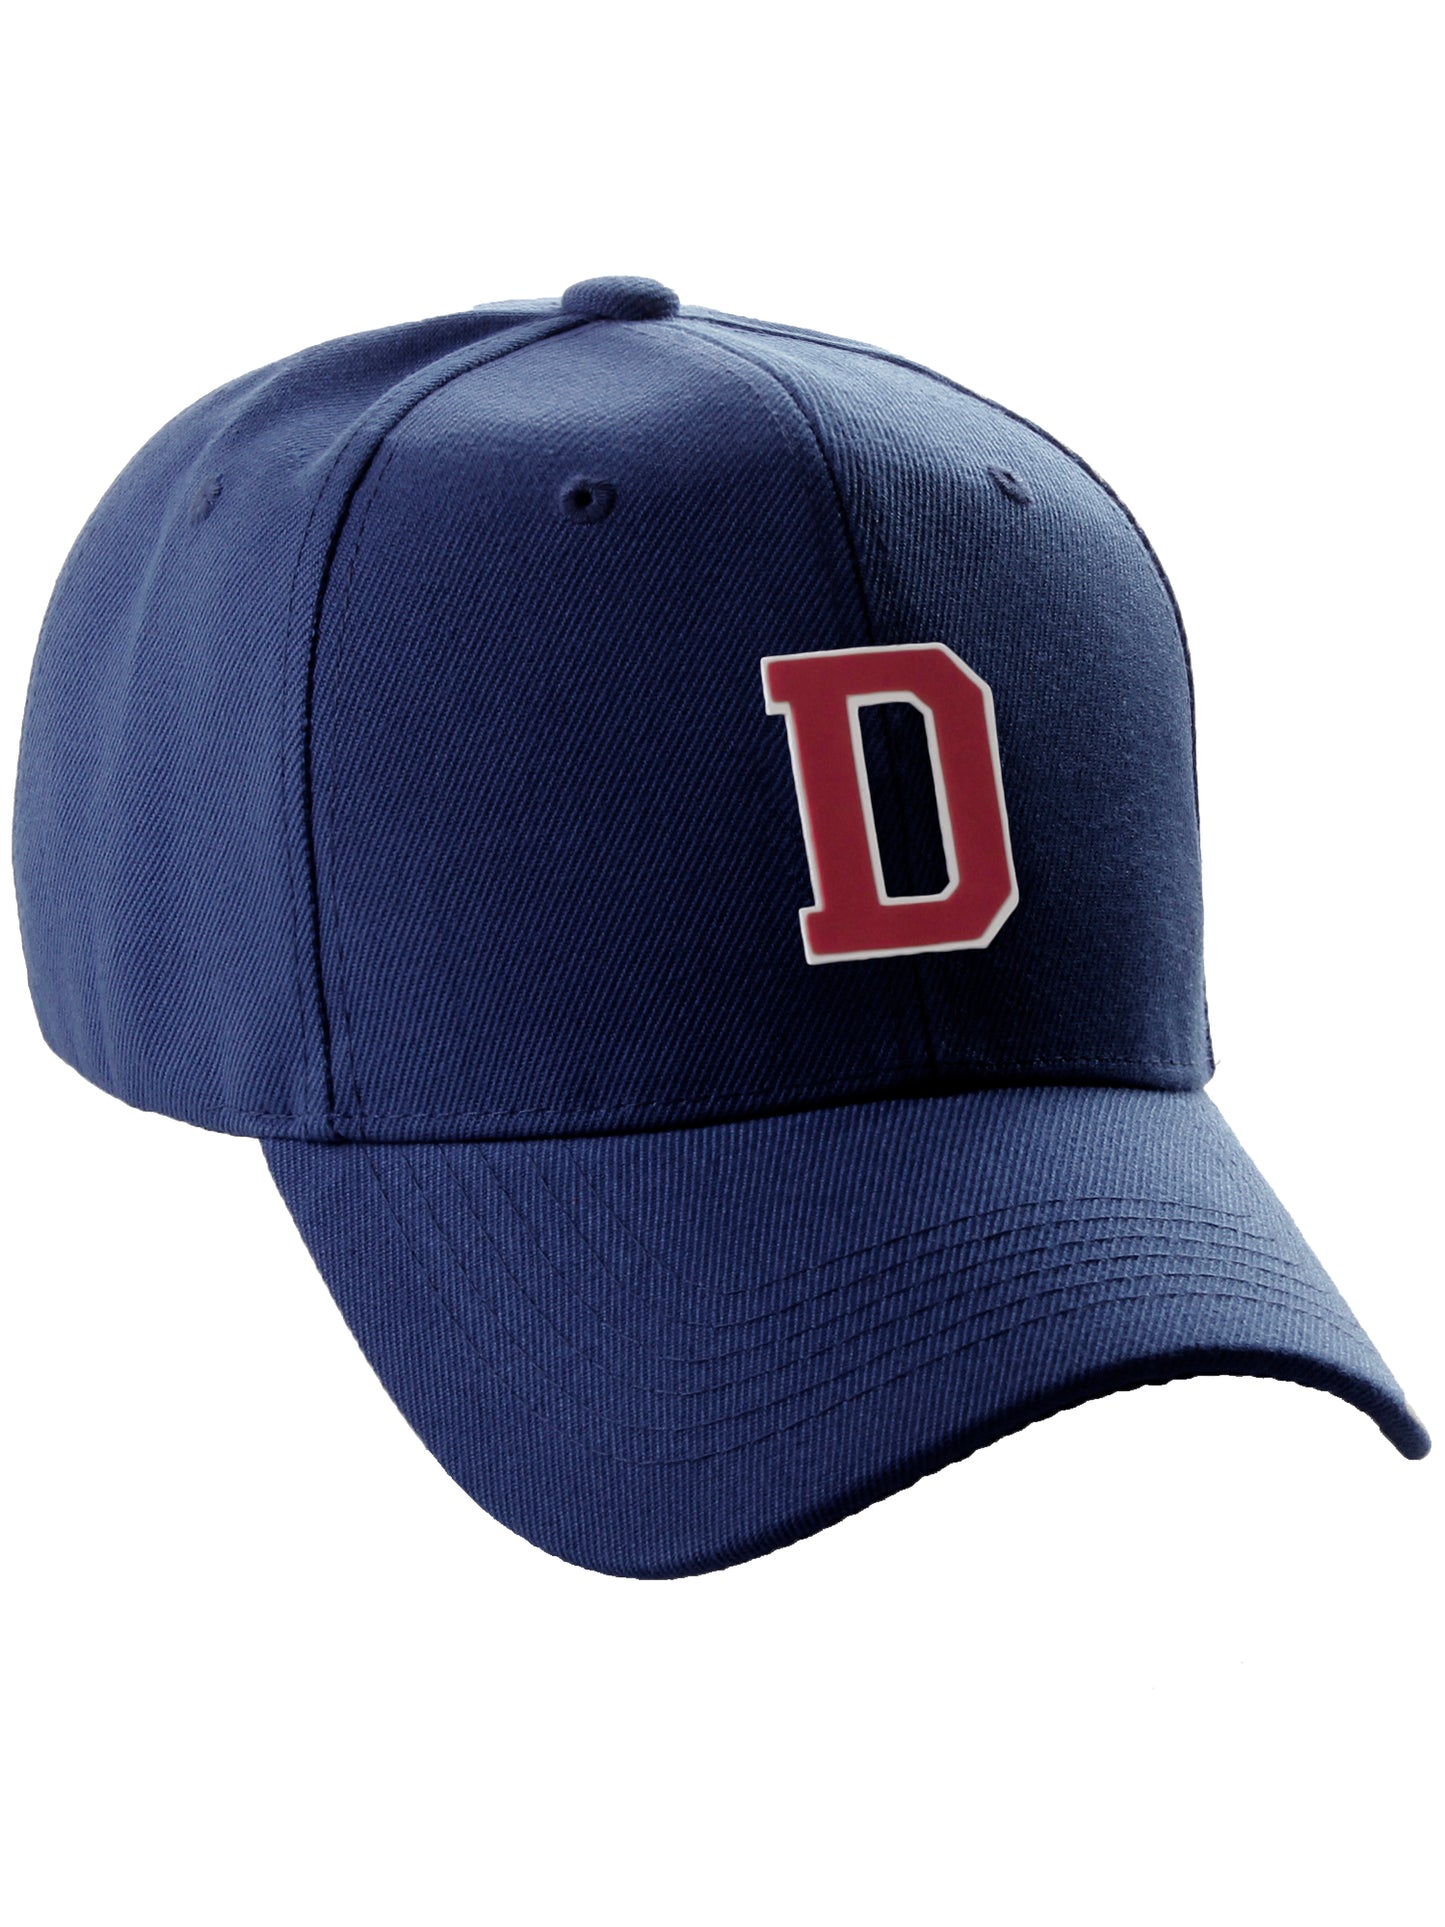 Classic Baseball Hat Custom A to Z Initial Team Letter, Navy Cap White Red